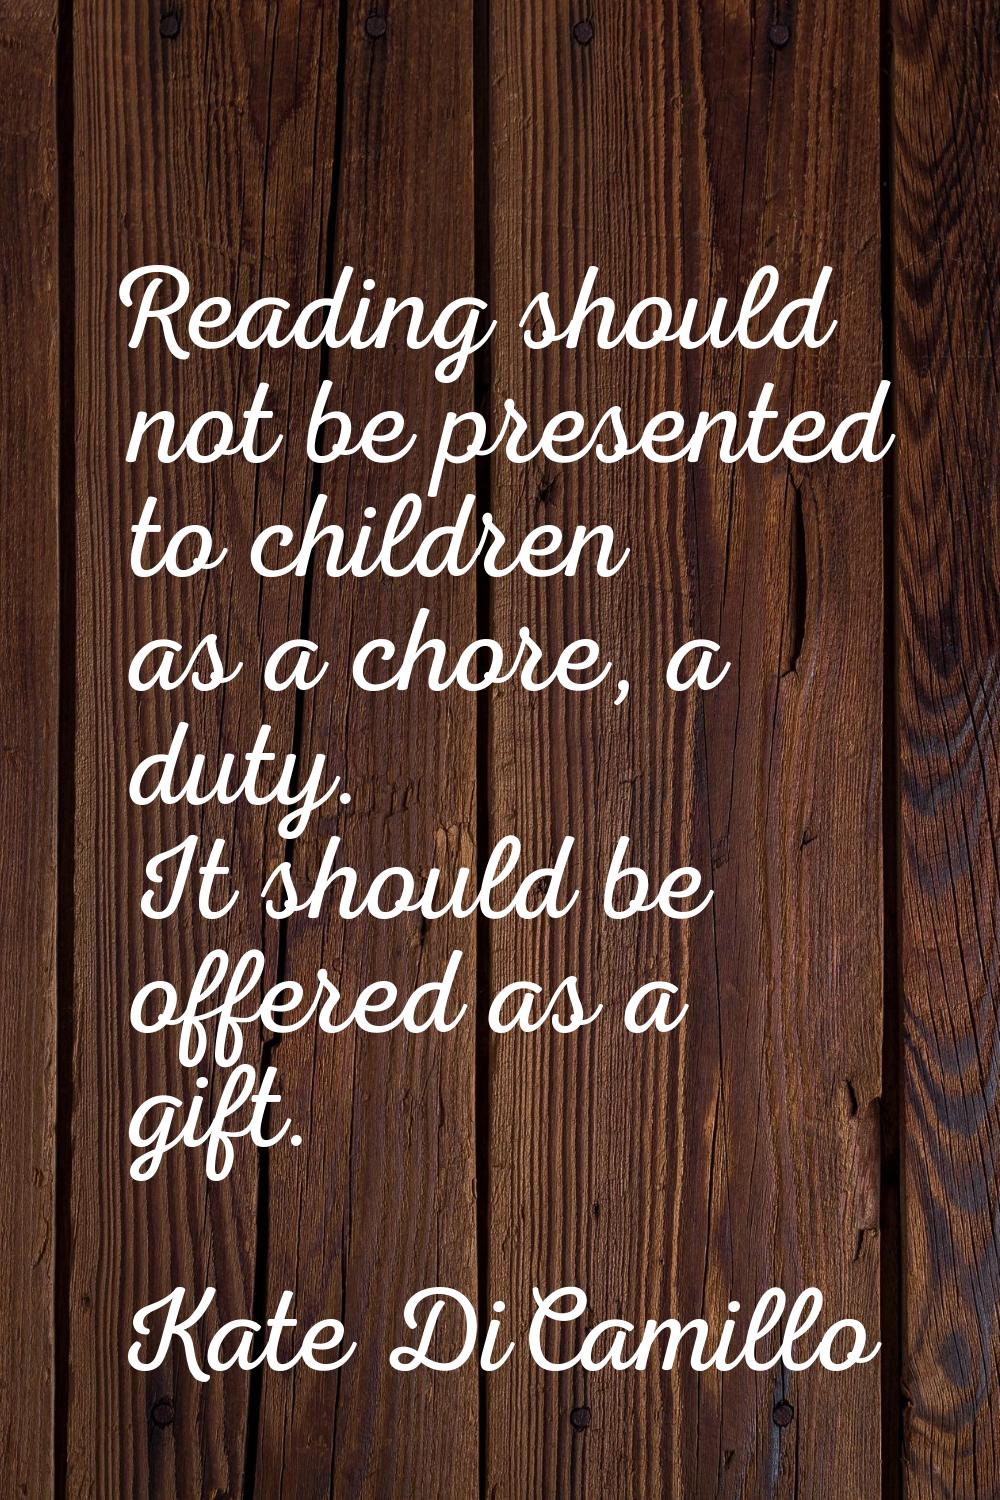 Reading should not be presented to children as a chore, a duty. It should be offered as a gift.